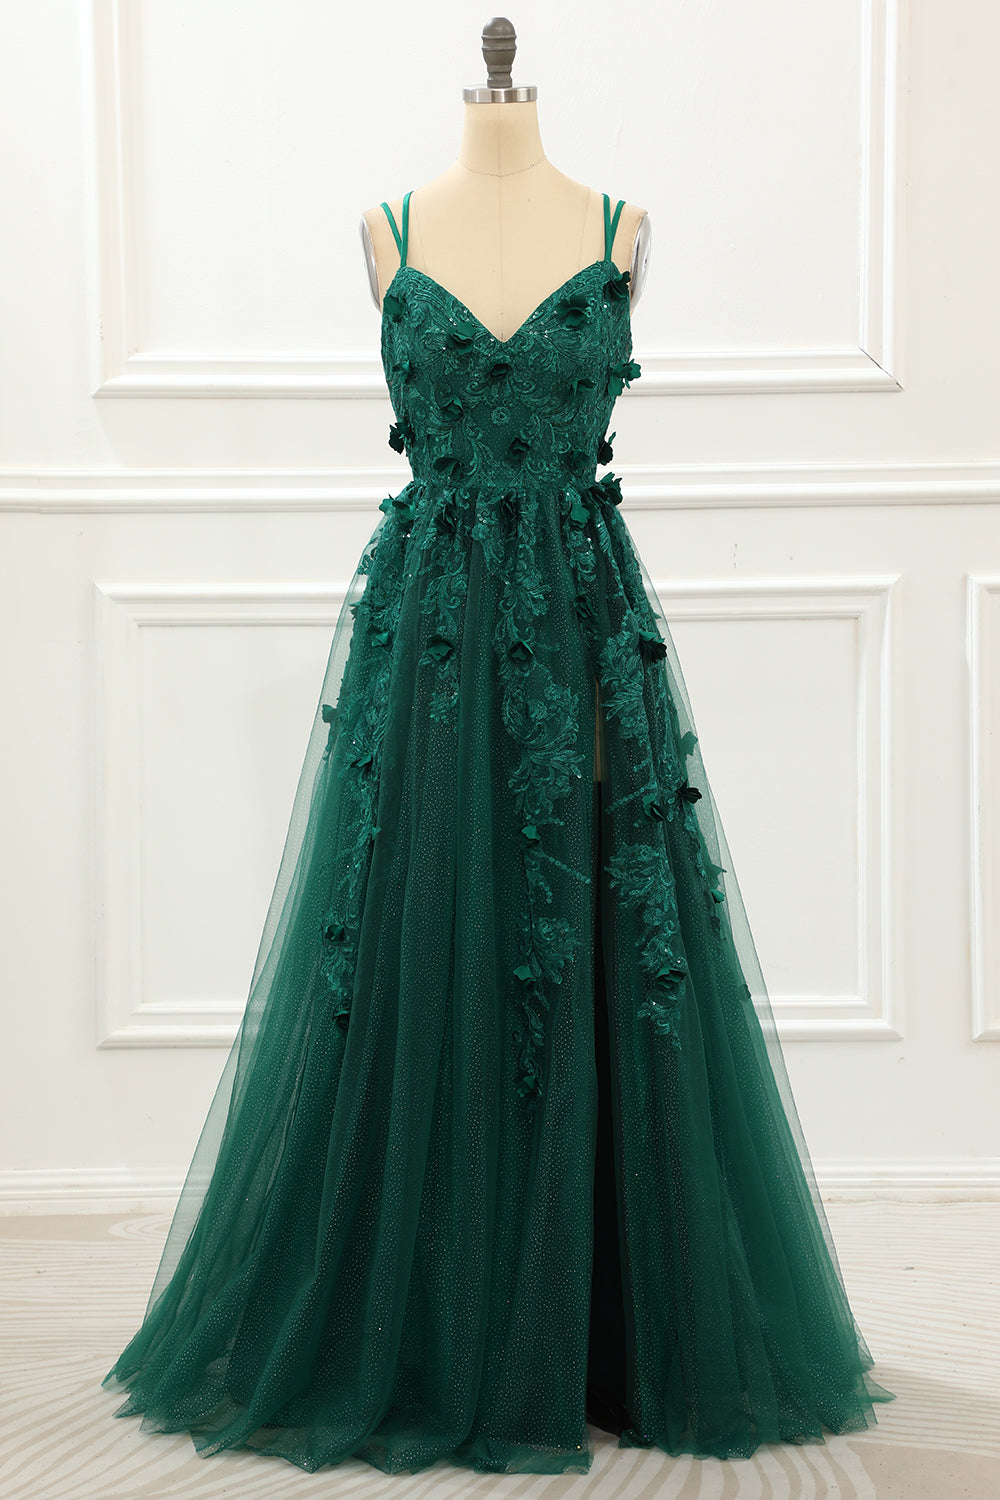 Prom Dresses 2029 Black, A Line Dark Green Tulle Prom Dress with Appliques